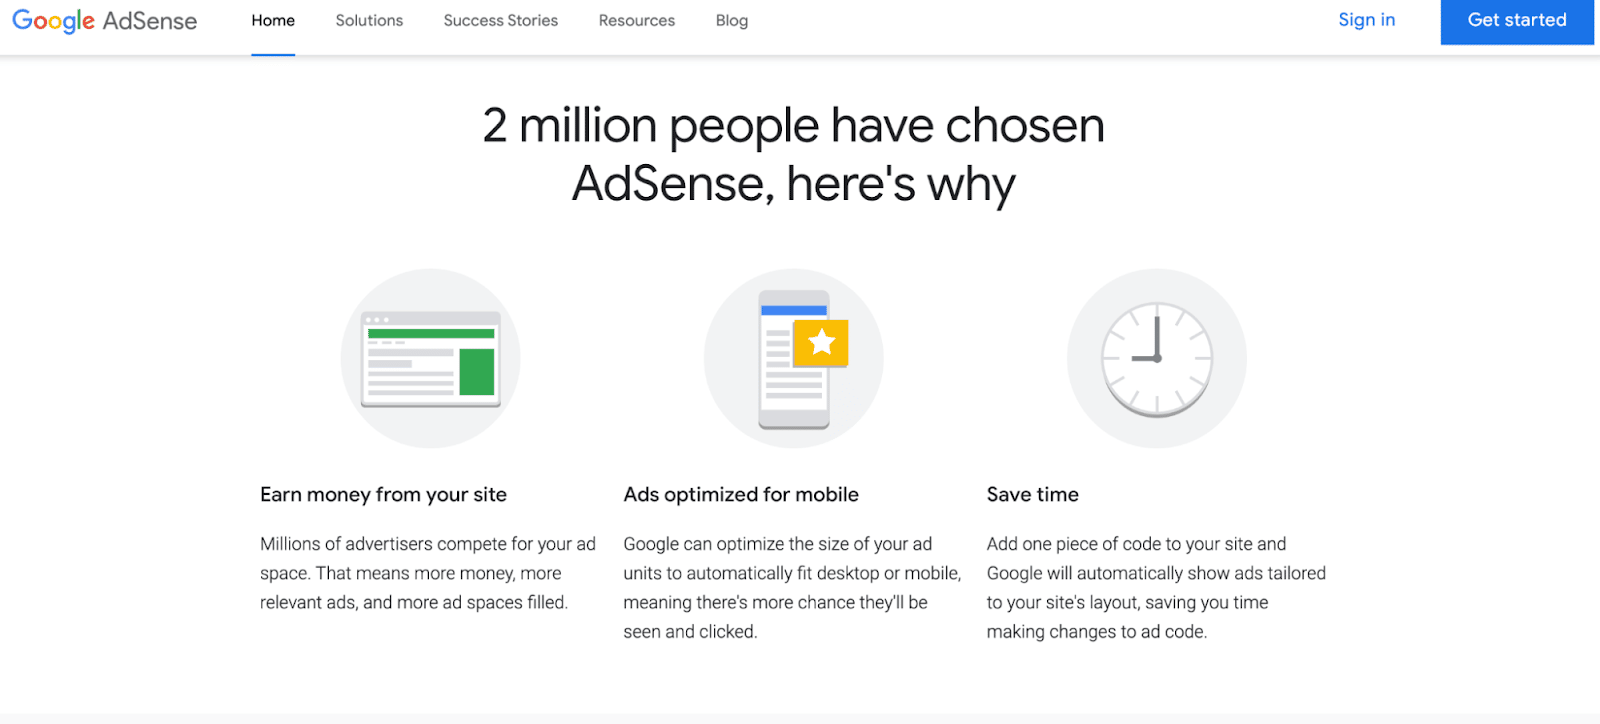 The homepage for Google AdSense